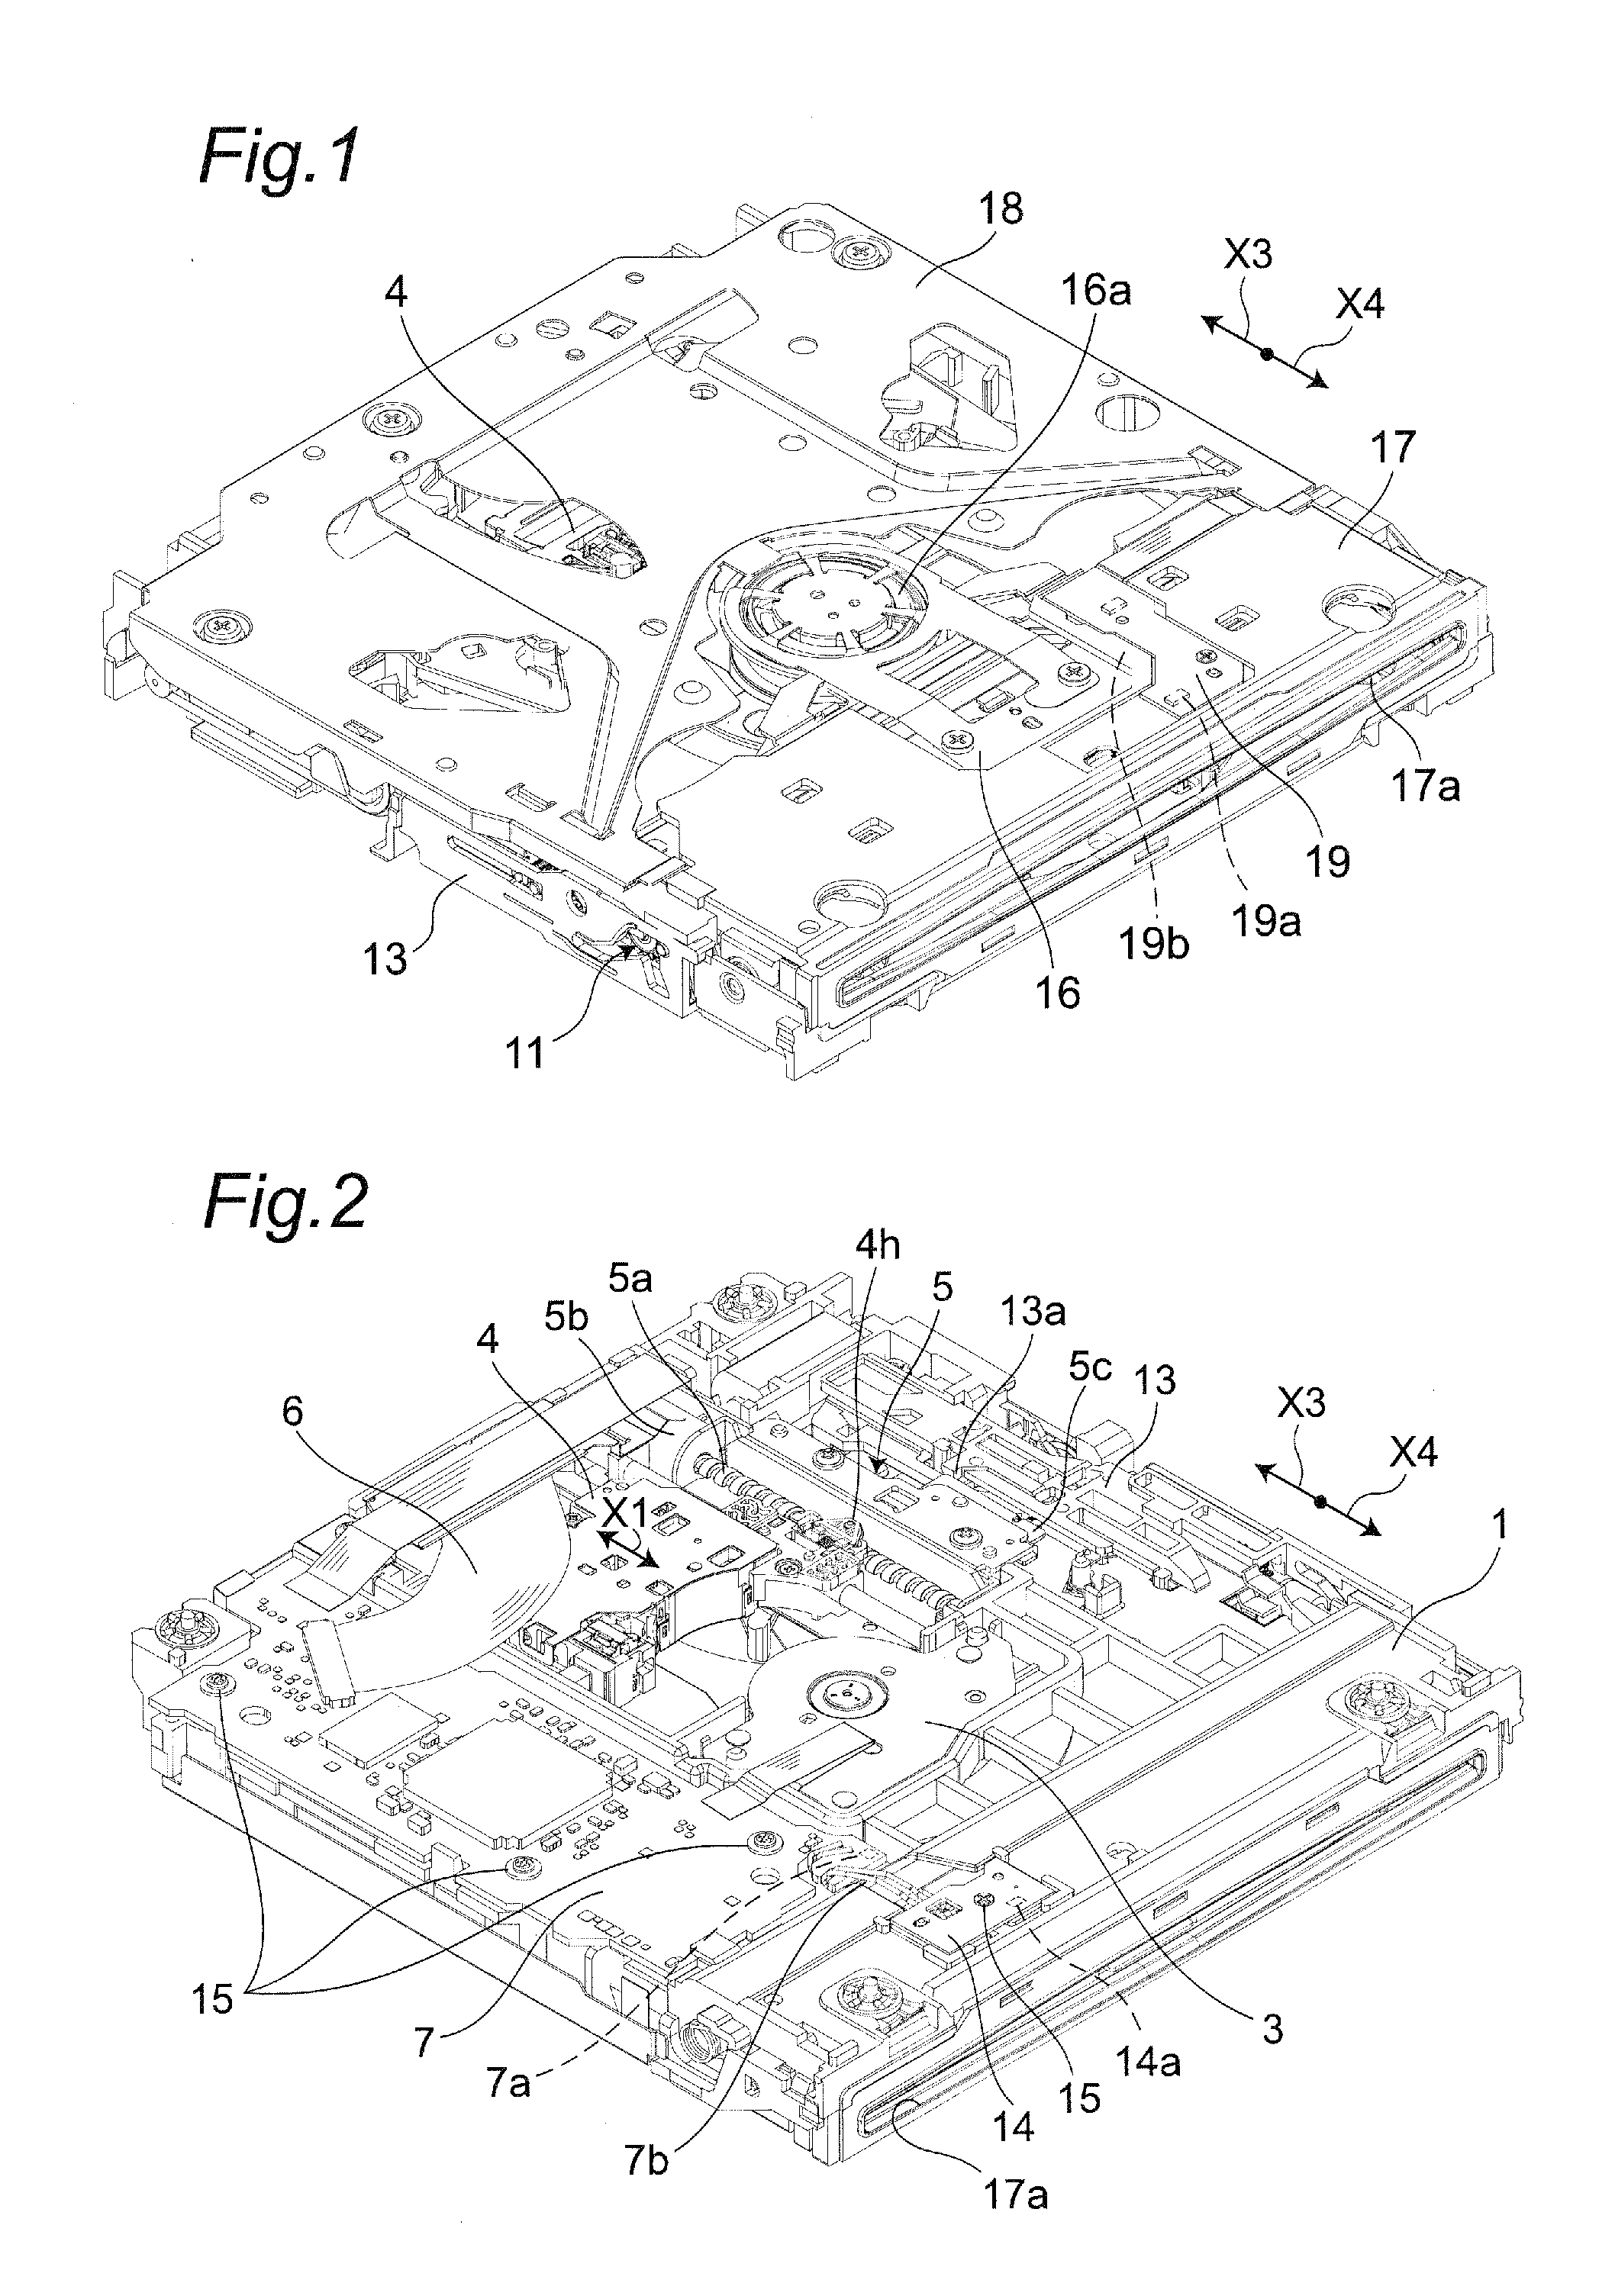 Lens cleaner and optical disc device